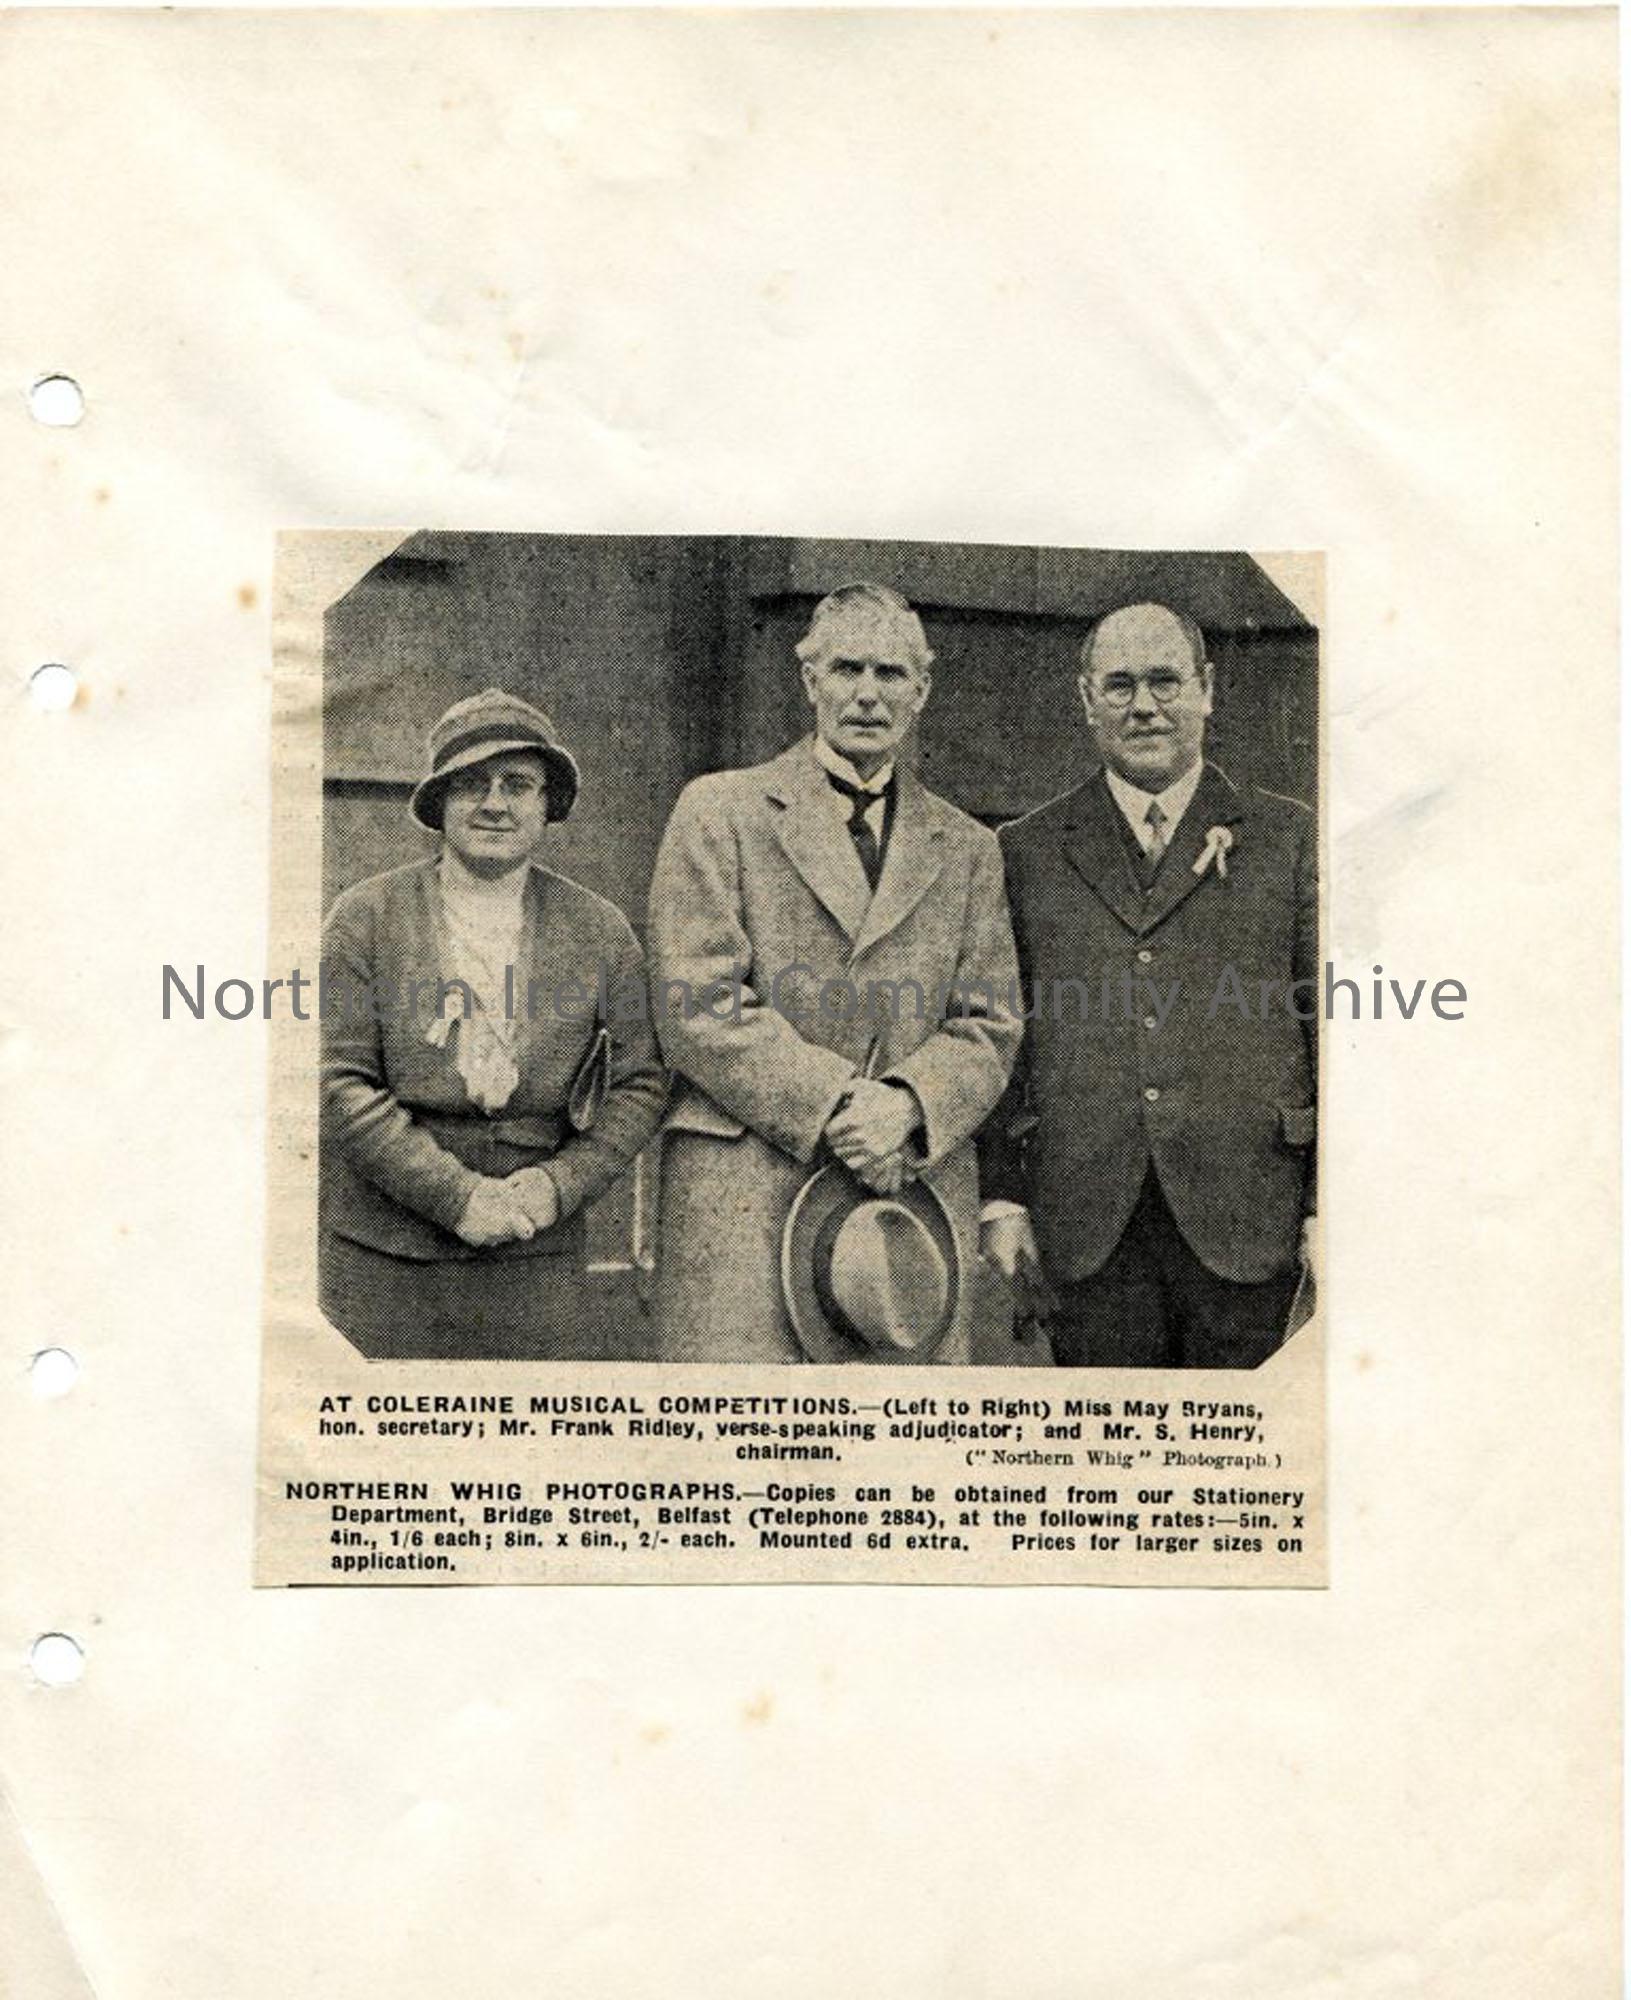 Photograph from newspaper – Coleraine Music Festival including the Chairman, Sam Henry